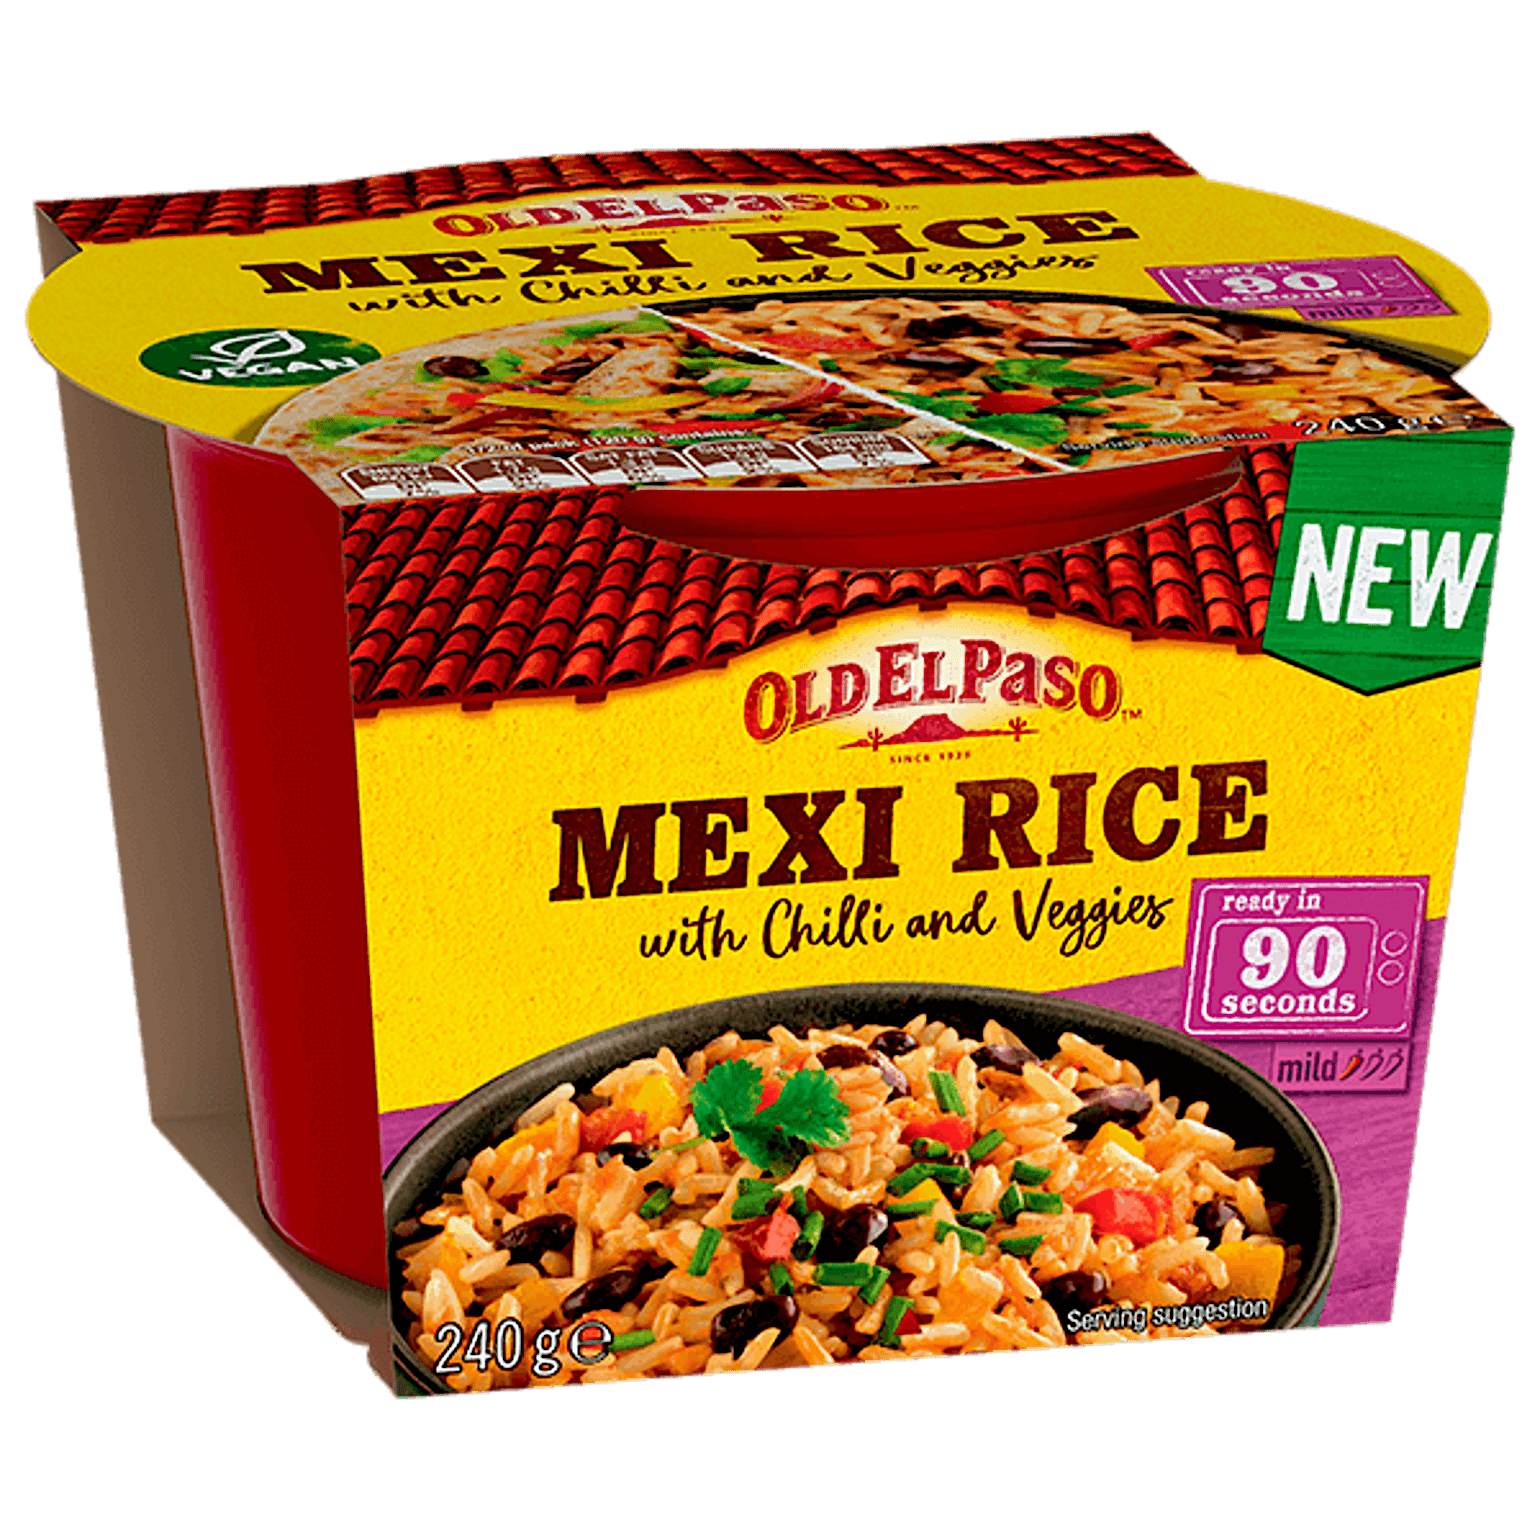 a pack of Old El Paso's mild mexi rice with chili & veggies (240g)